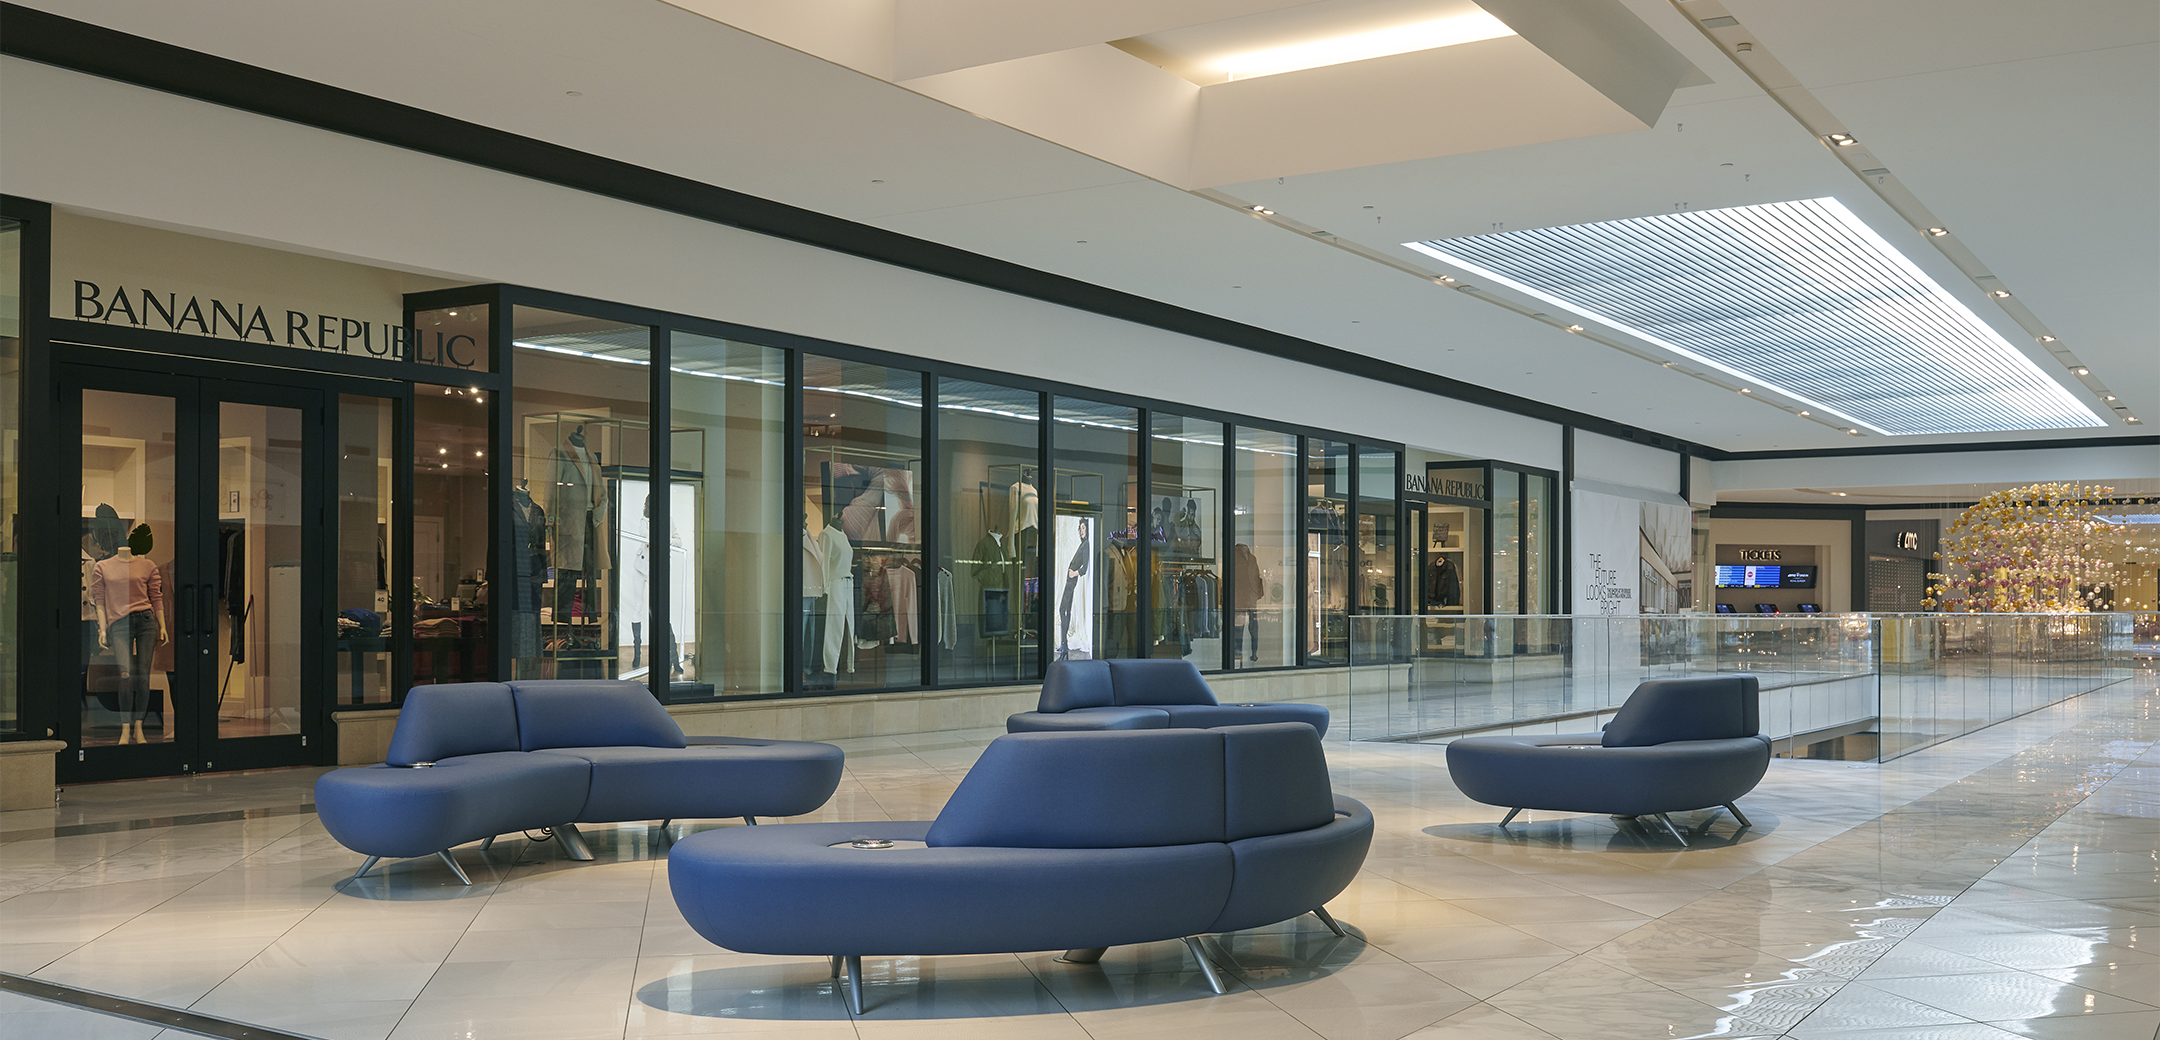 An angled interior view of the Shop at Riverside mall second floor, showcasing the rest seating area, with blue couches, tile flooring and a "Banana Republic" signage storefront in the background.